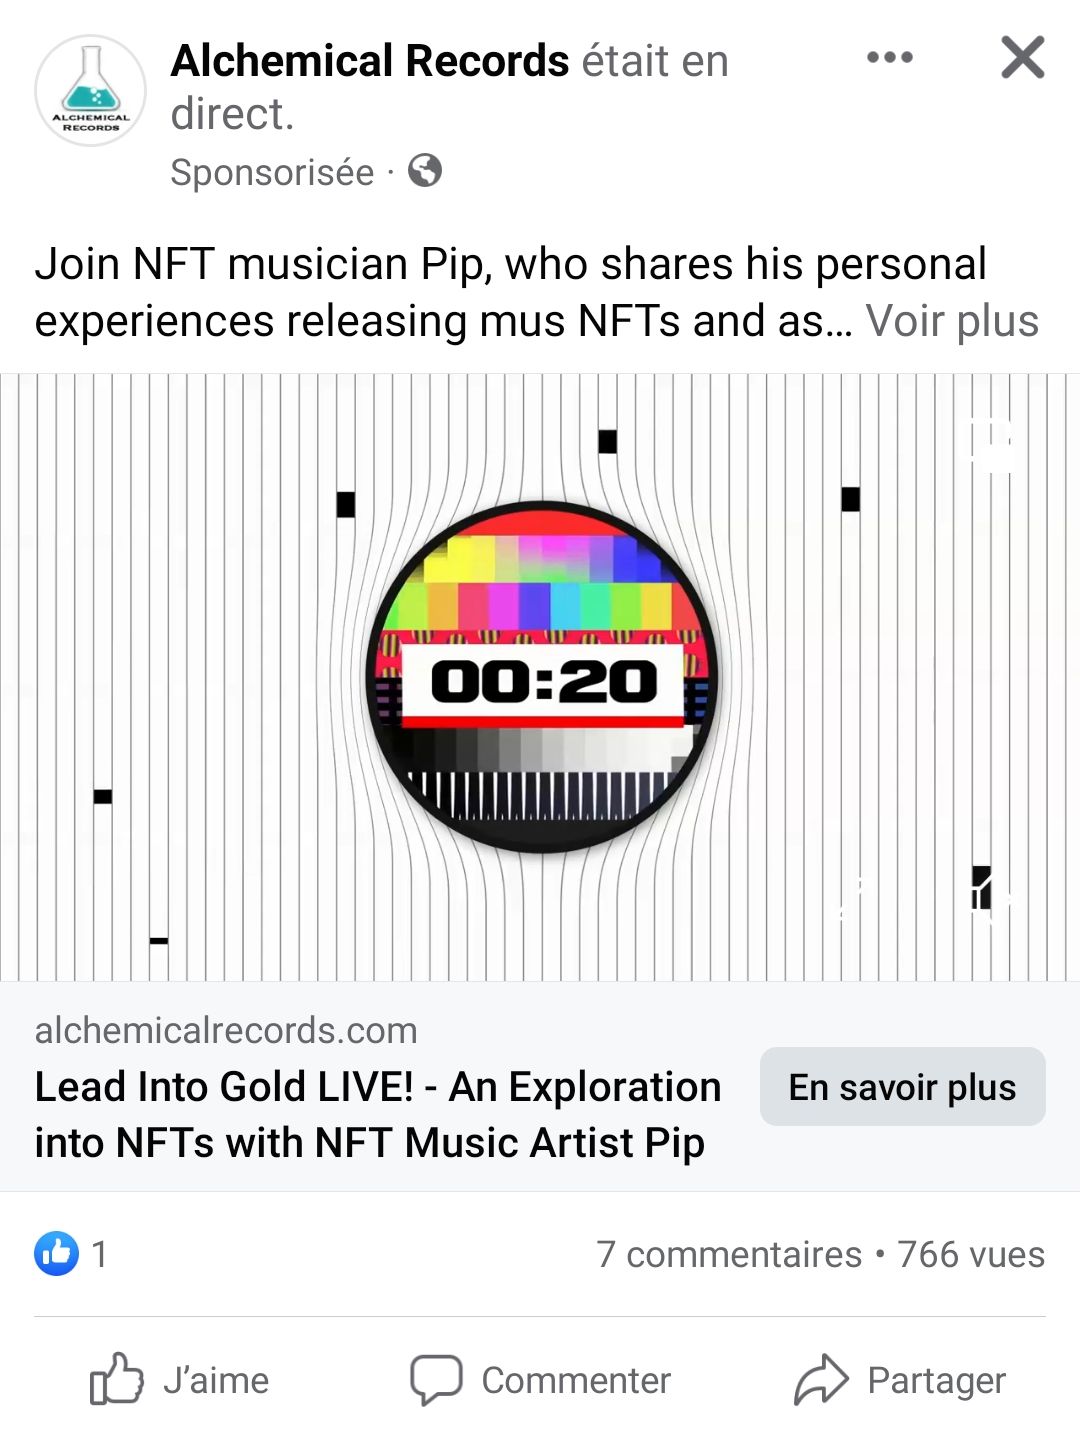 Alchemical Records post about NFTs